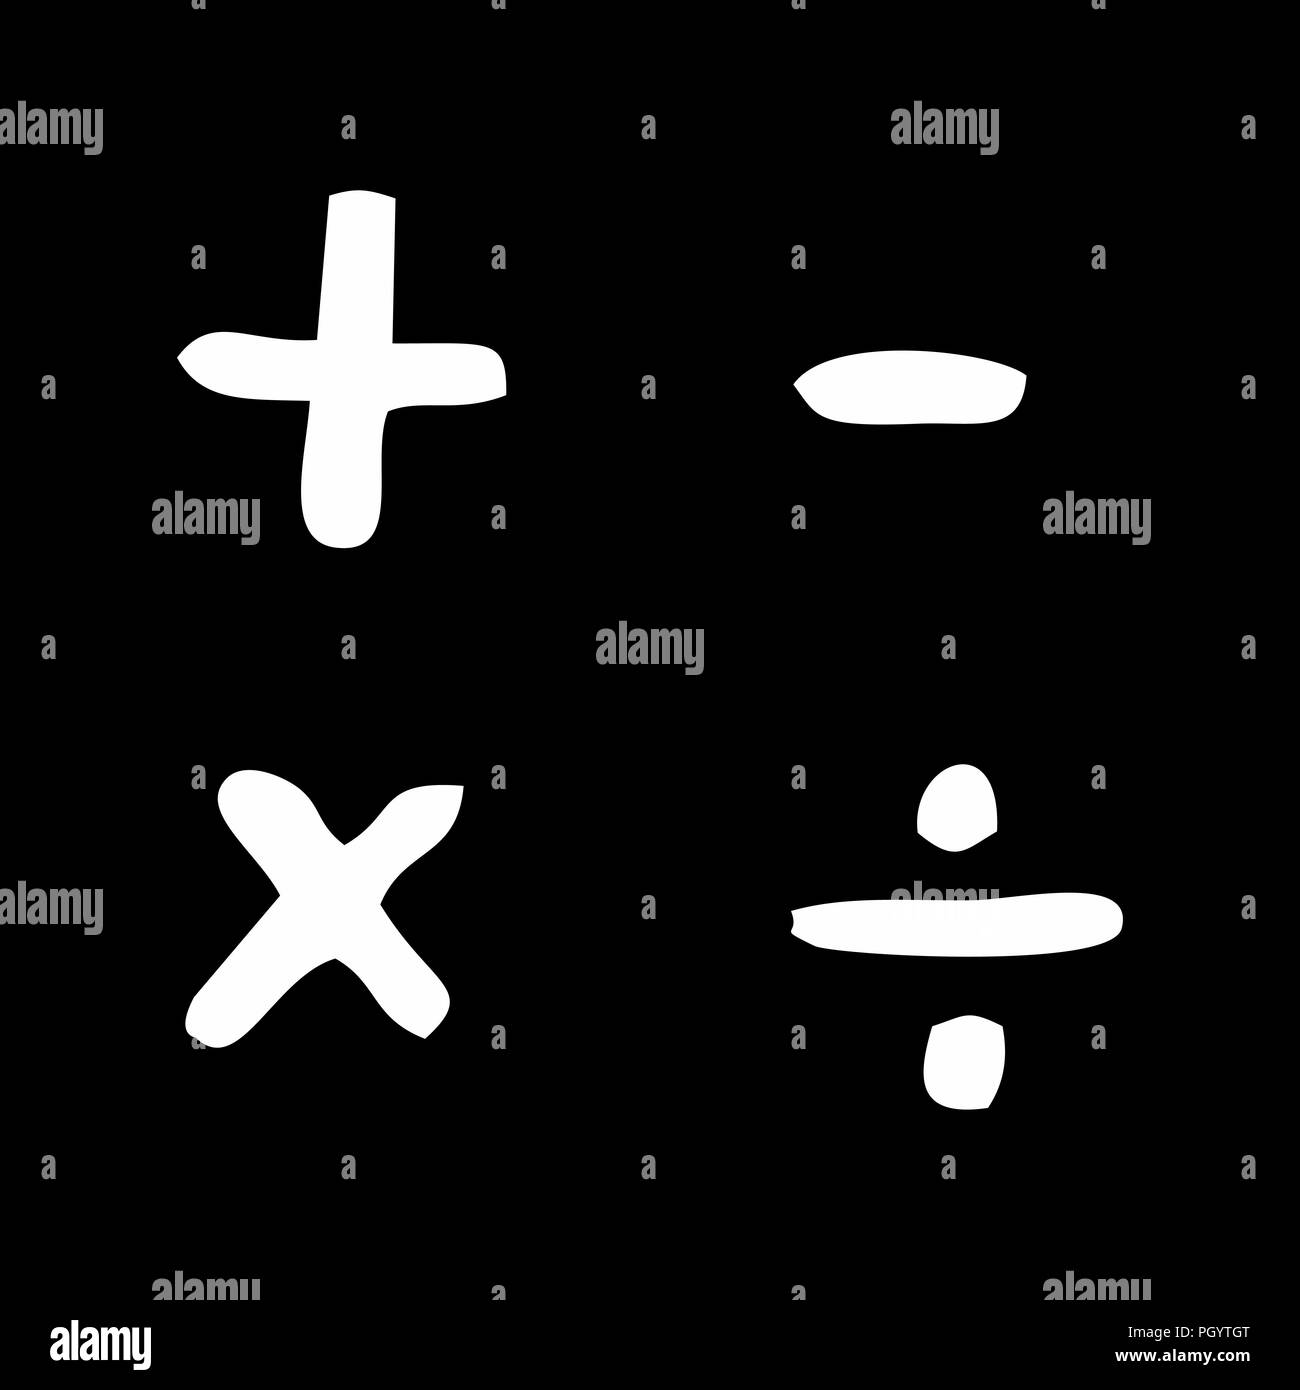 Freehand illustration of basic mathematical signs on dark background Stock Vector